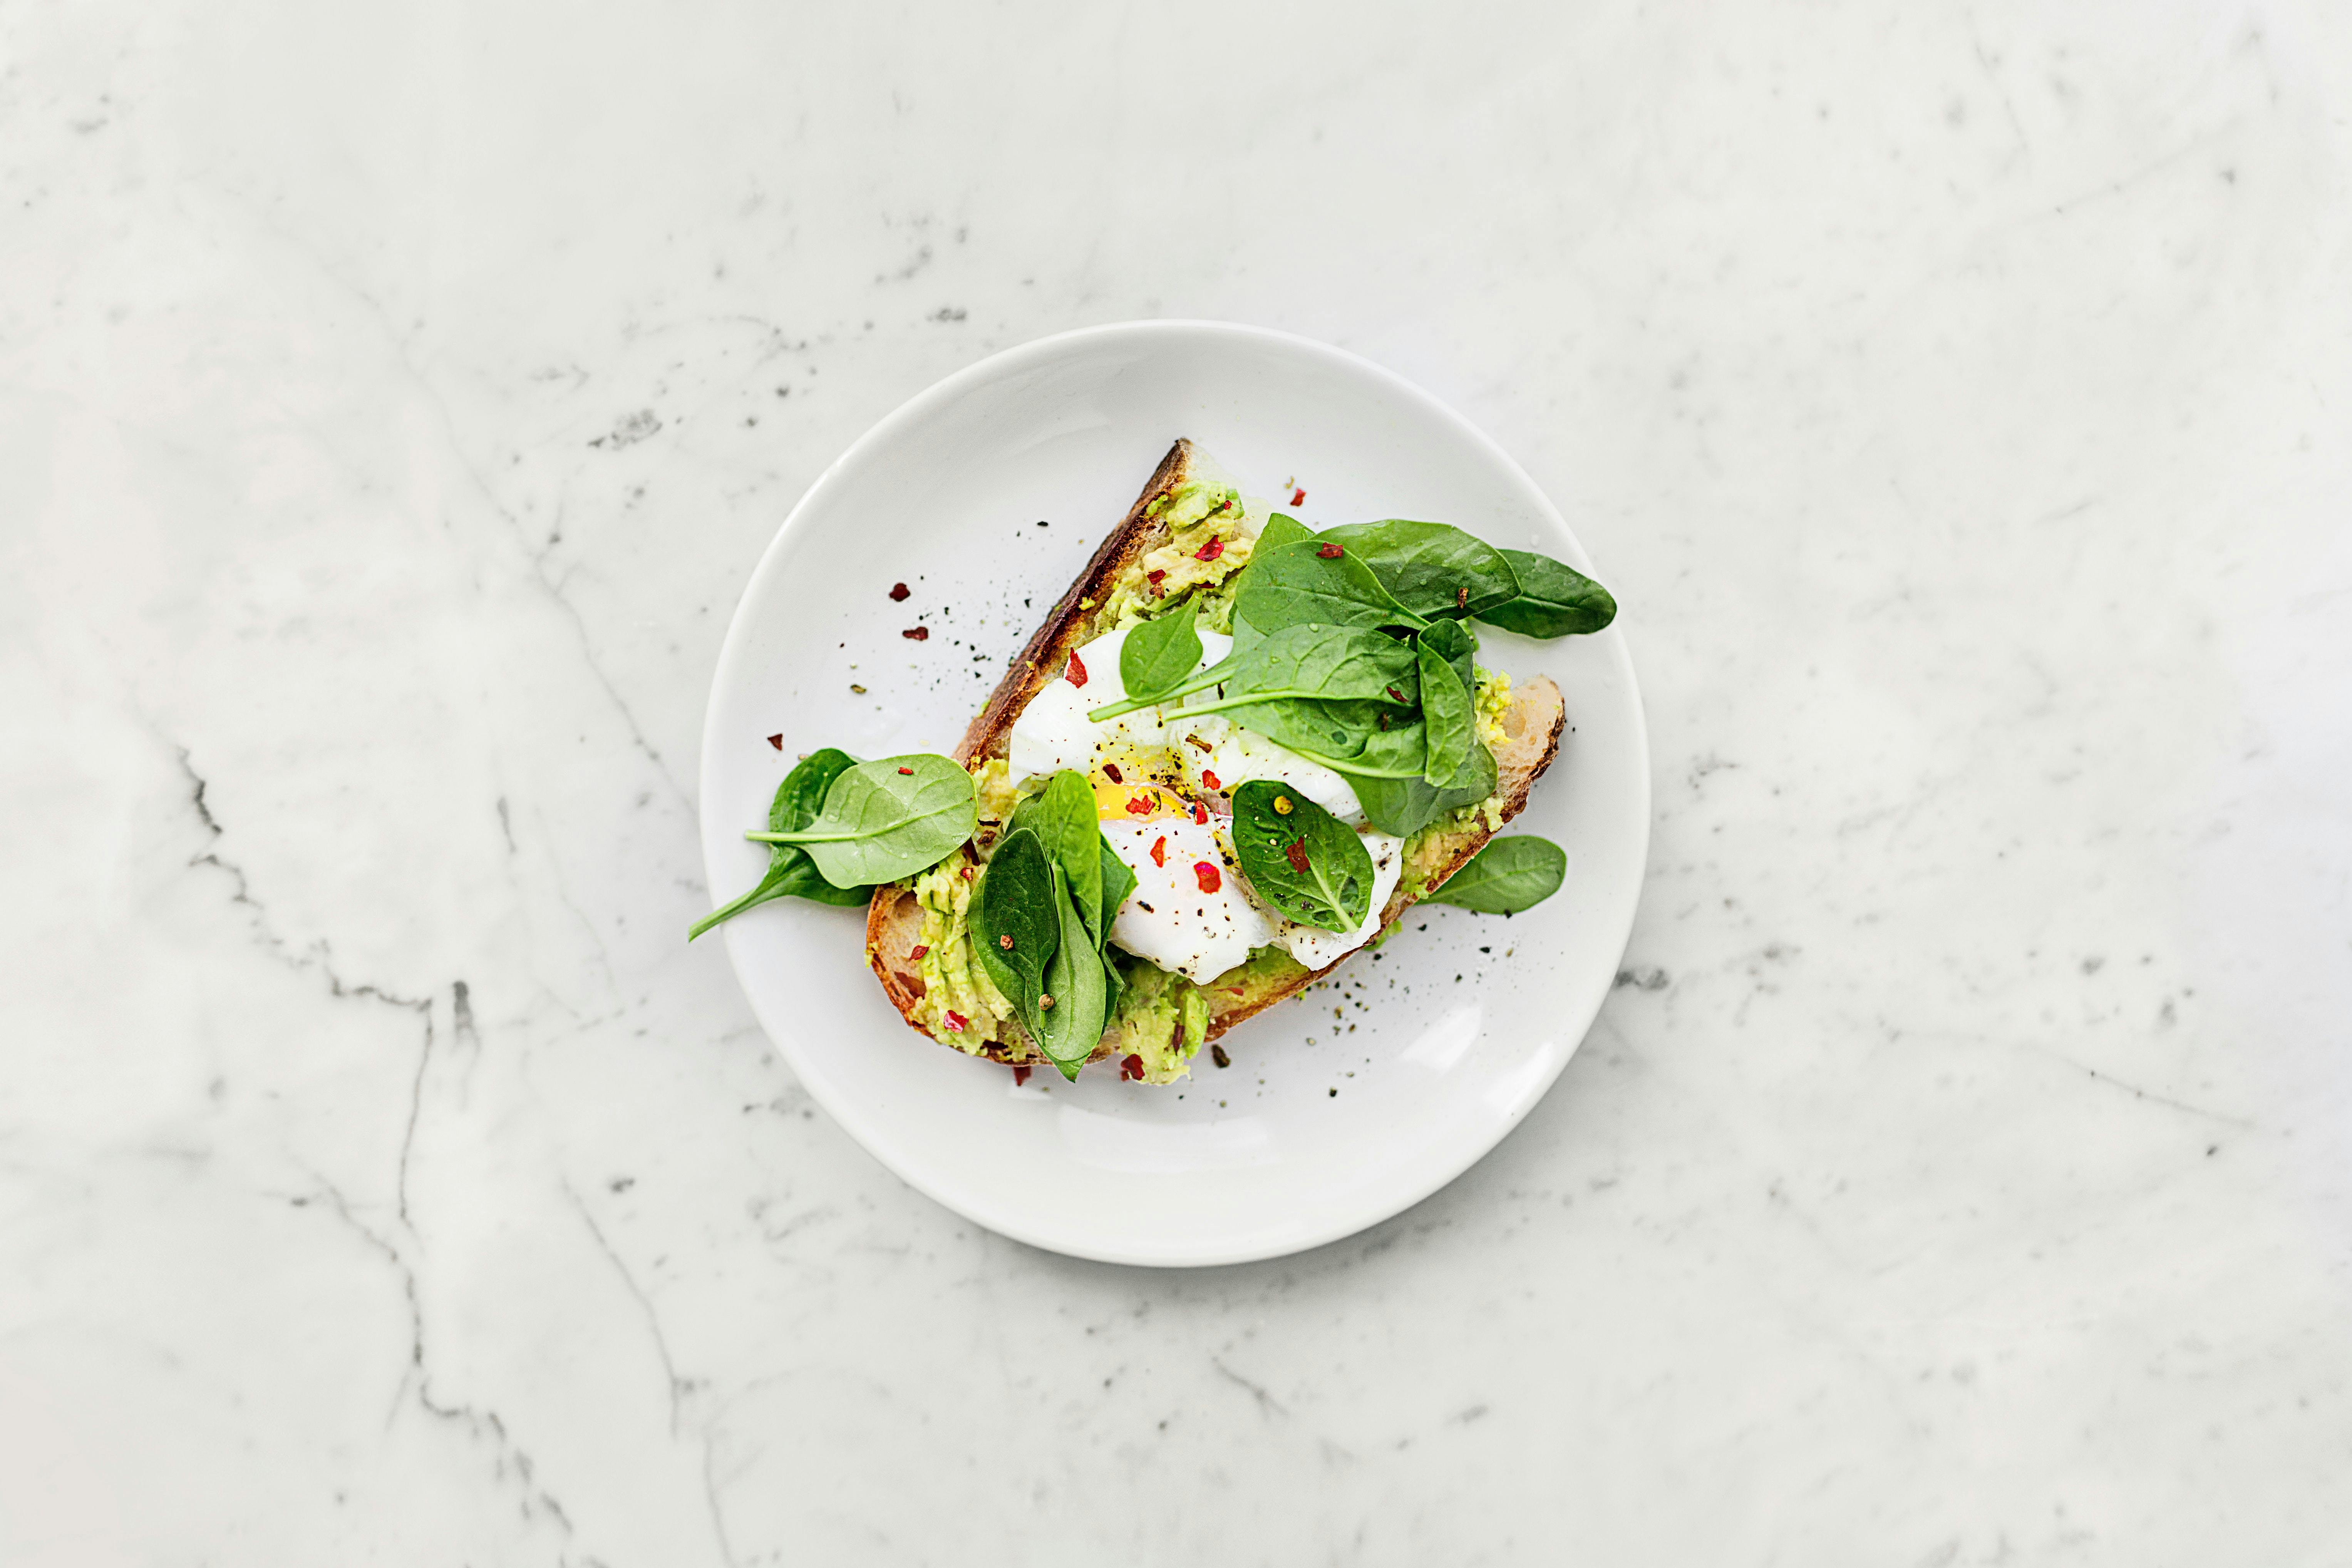 Avocado on toast with egg and spinach on white plate on marble background